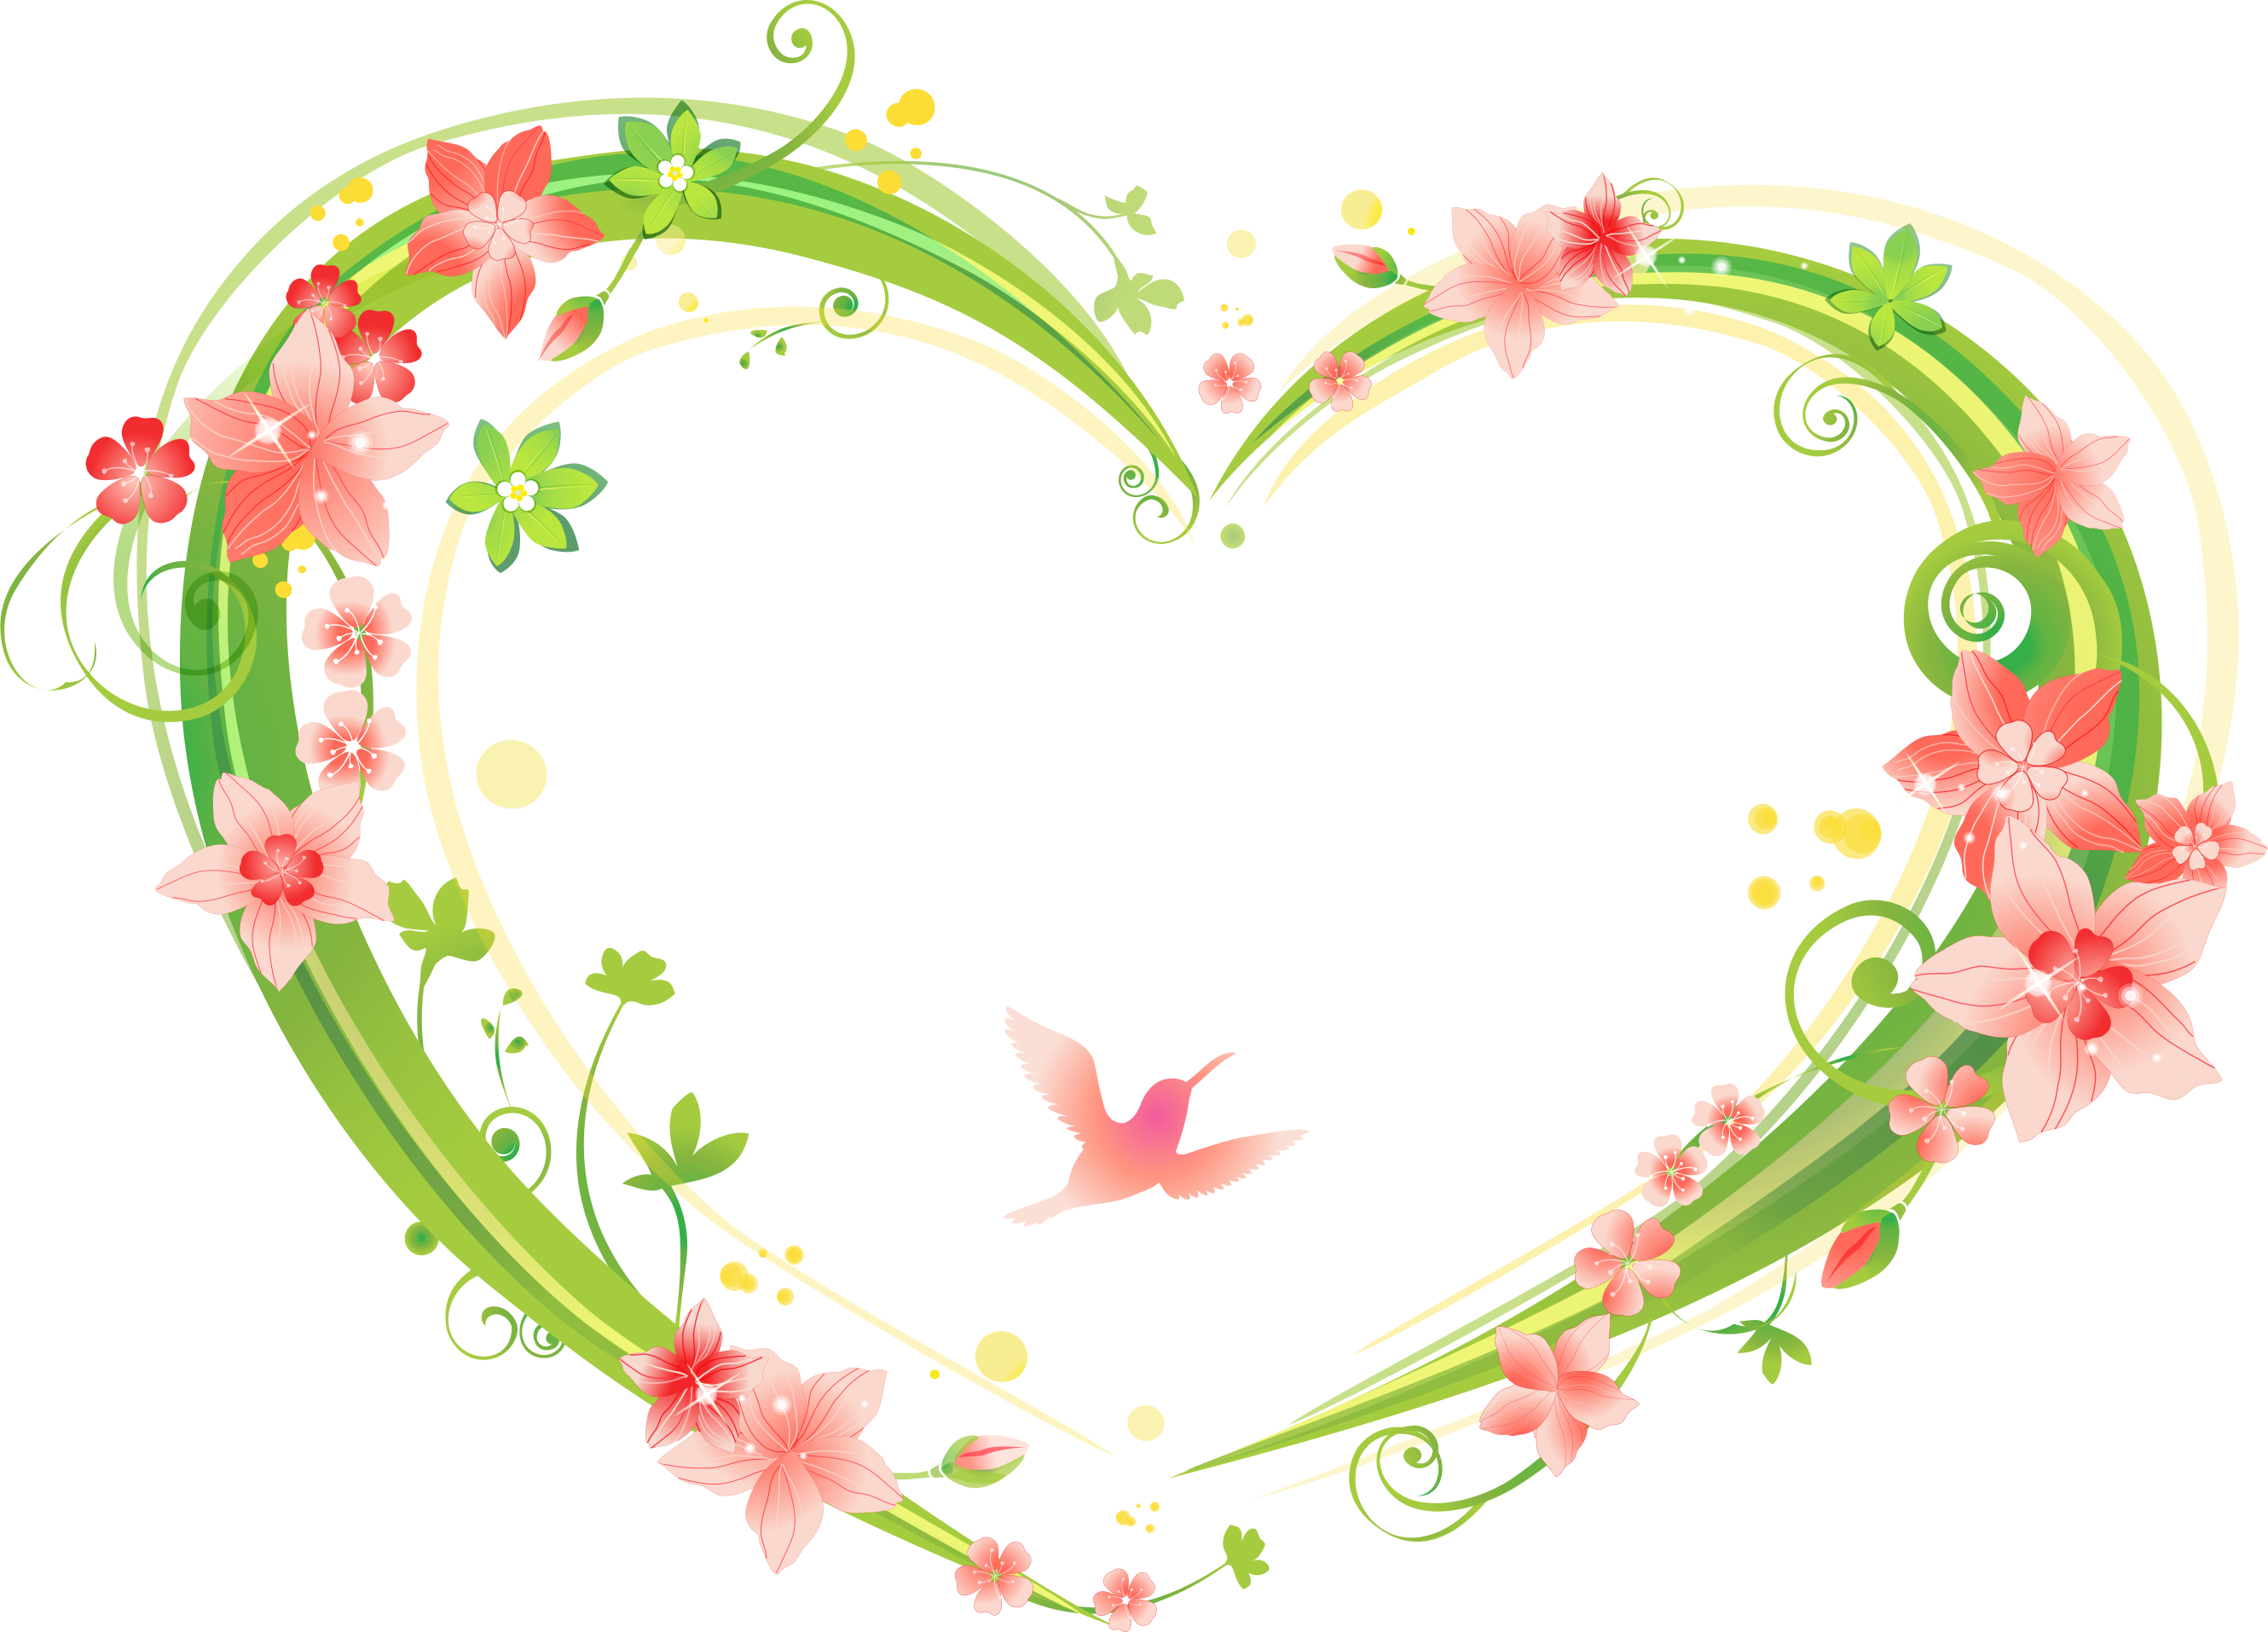 Download Heart Shaped Flowers Frame 2660 1914 Transprent Png Png Image With No Background Pngkey Com